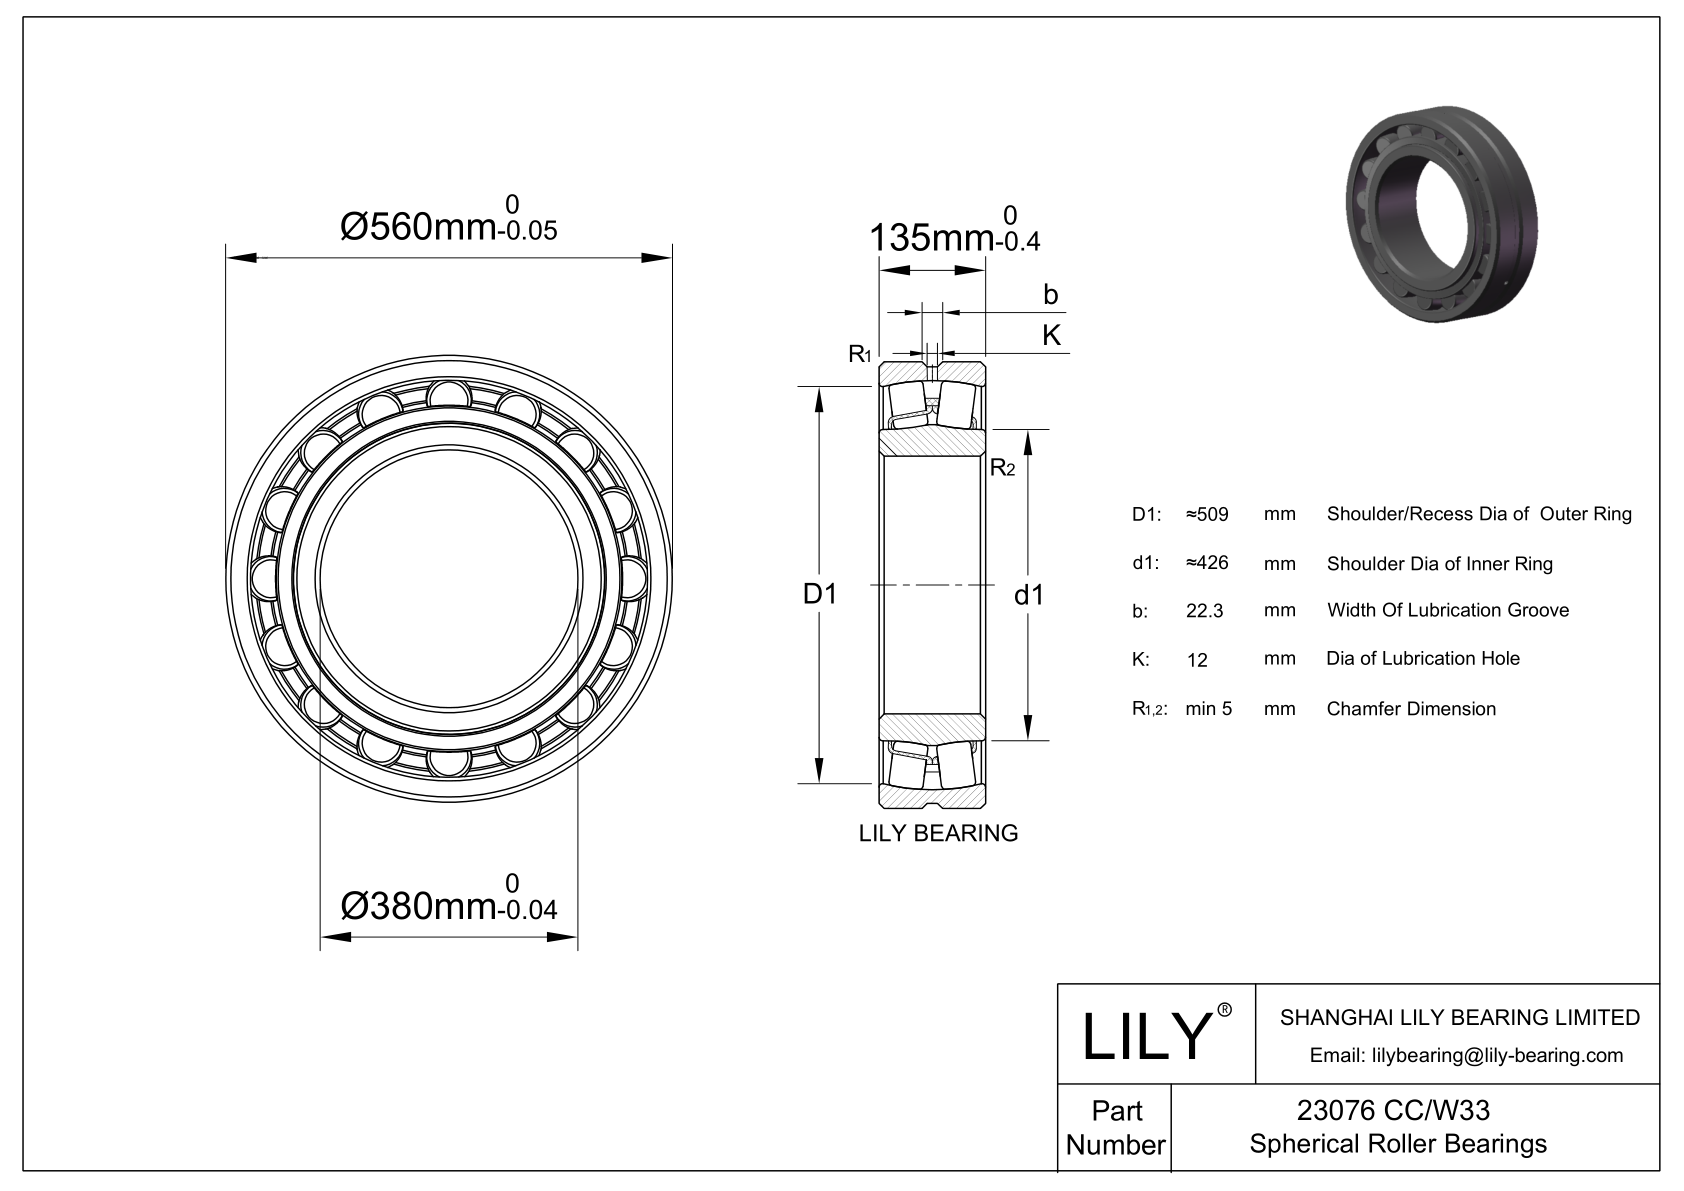 23076 CC/W33 Double Row Spherical Roller Bearing cad drawing